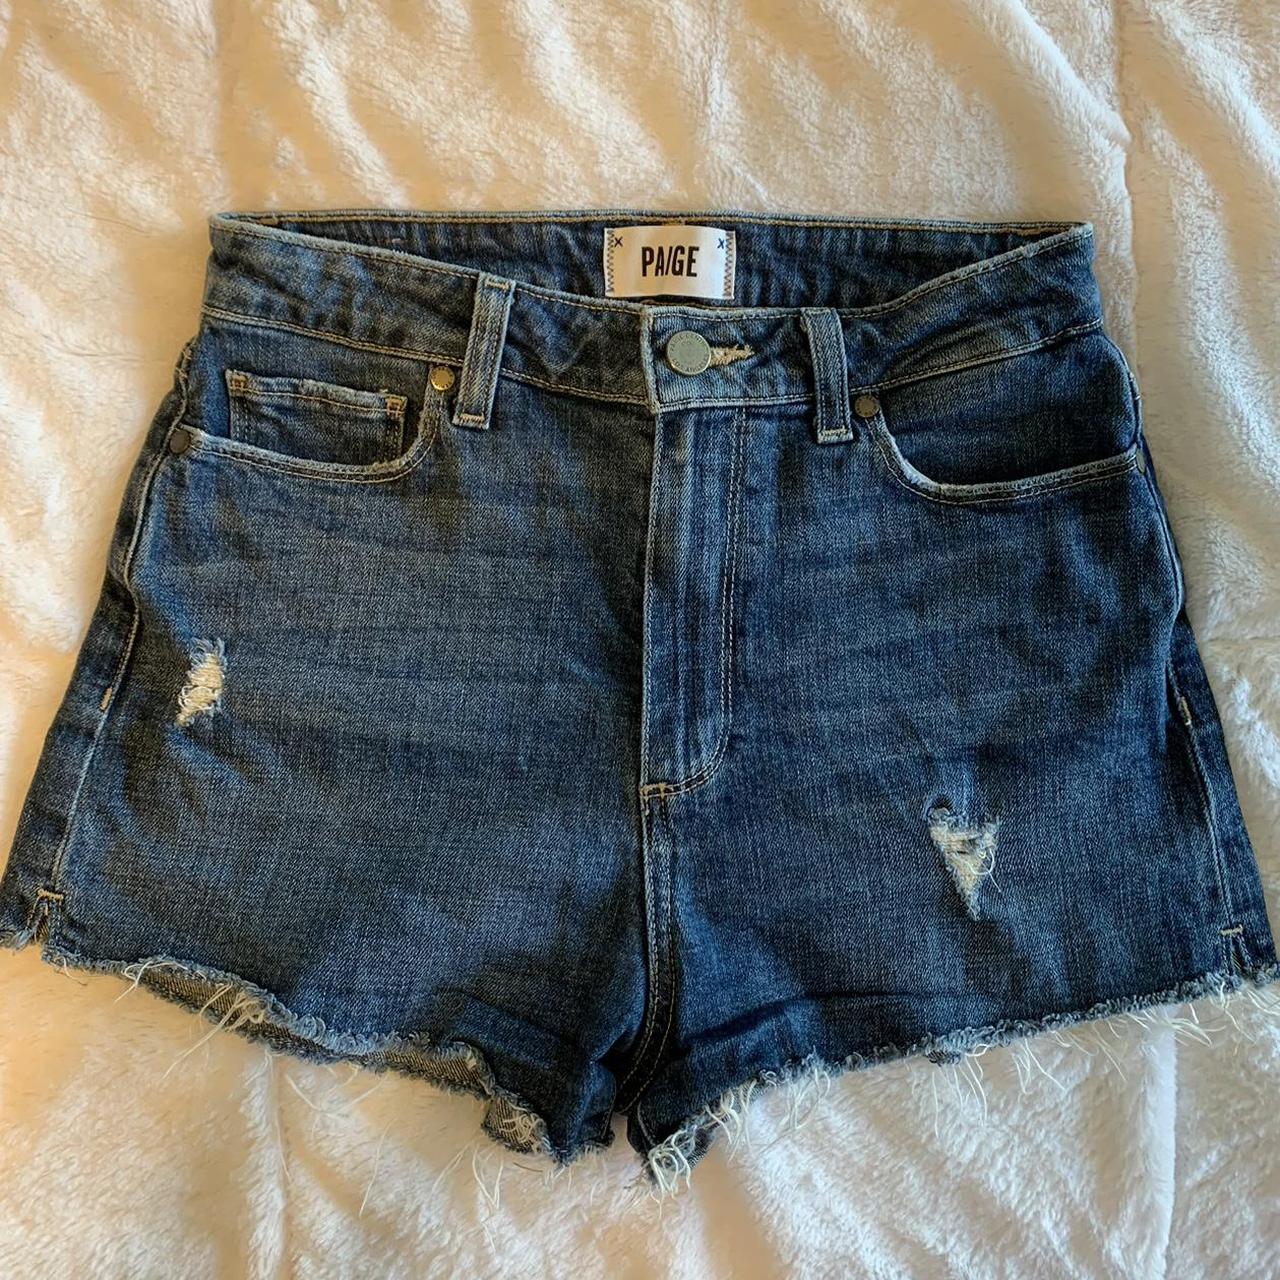 Very flattering Paige jean shorts, barely worn, size 28 - Depop